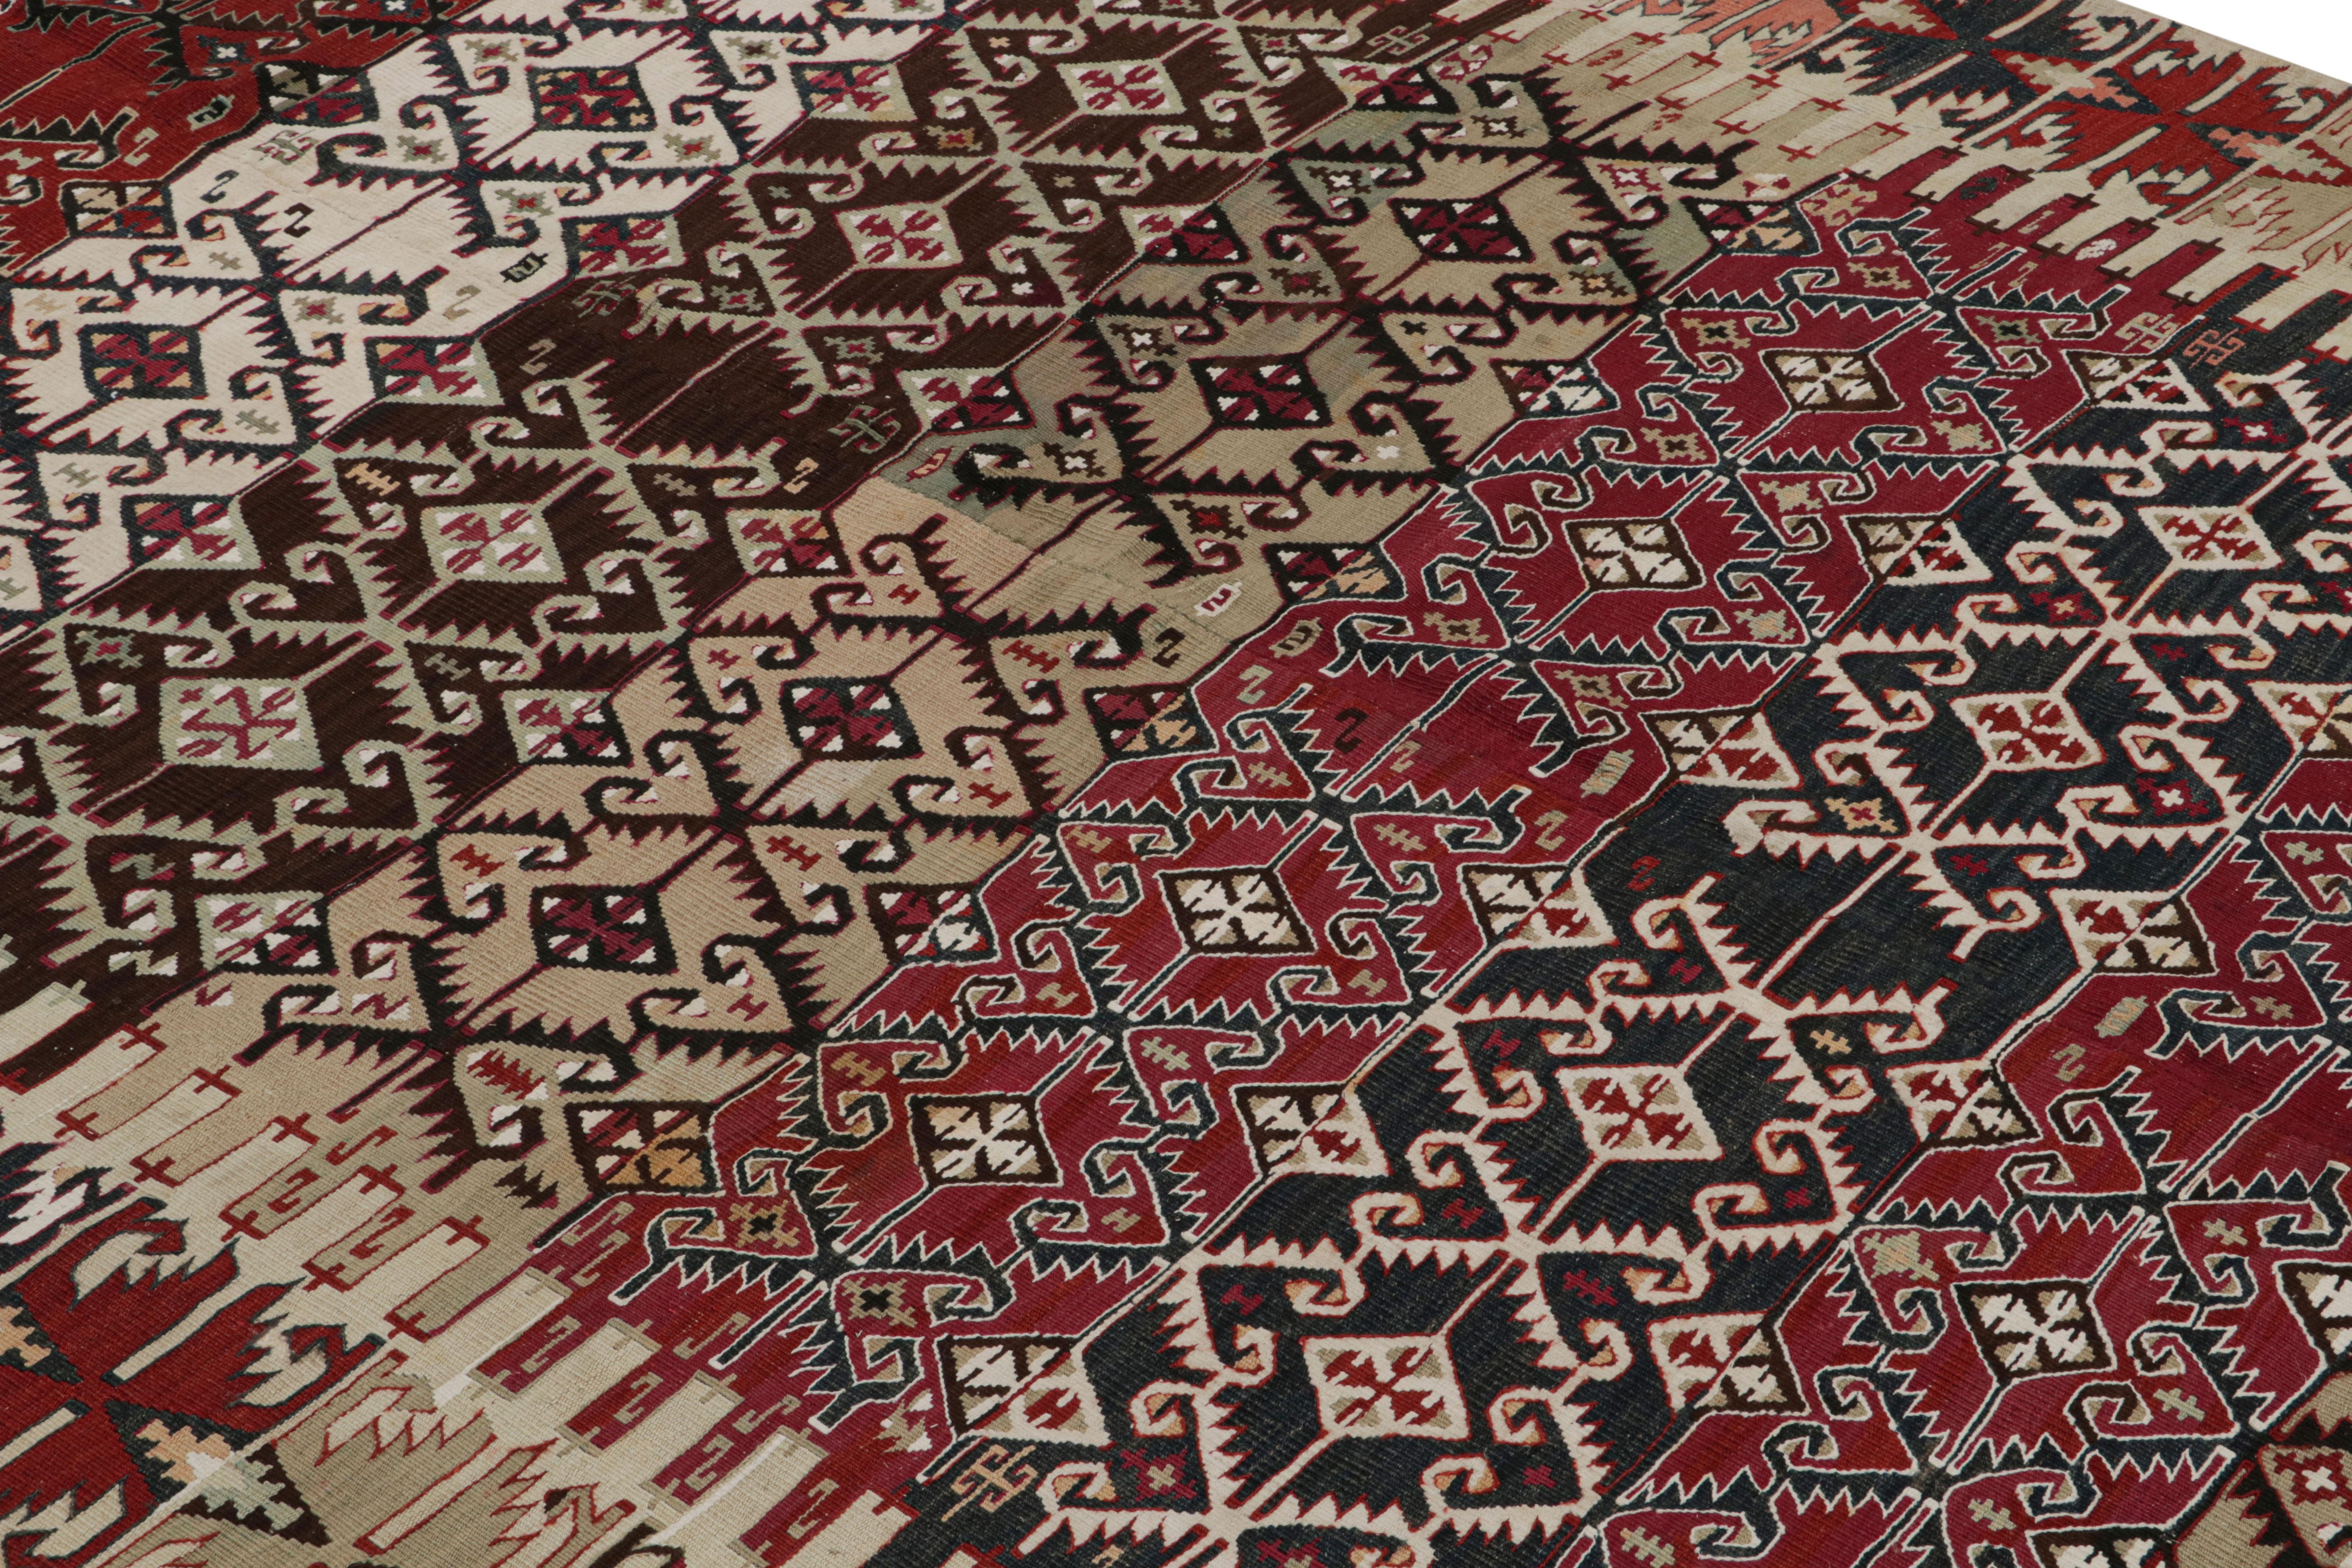 handwoven in Turkey originating between 1950-1960, this vintage midcentury 6x10 wool Kilim hails from the city of Malatya, one of our collection’s uncommon but welcomed rarities from Eastern Anatolia with a distinct pattern and colorway. The sharp,